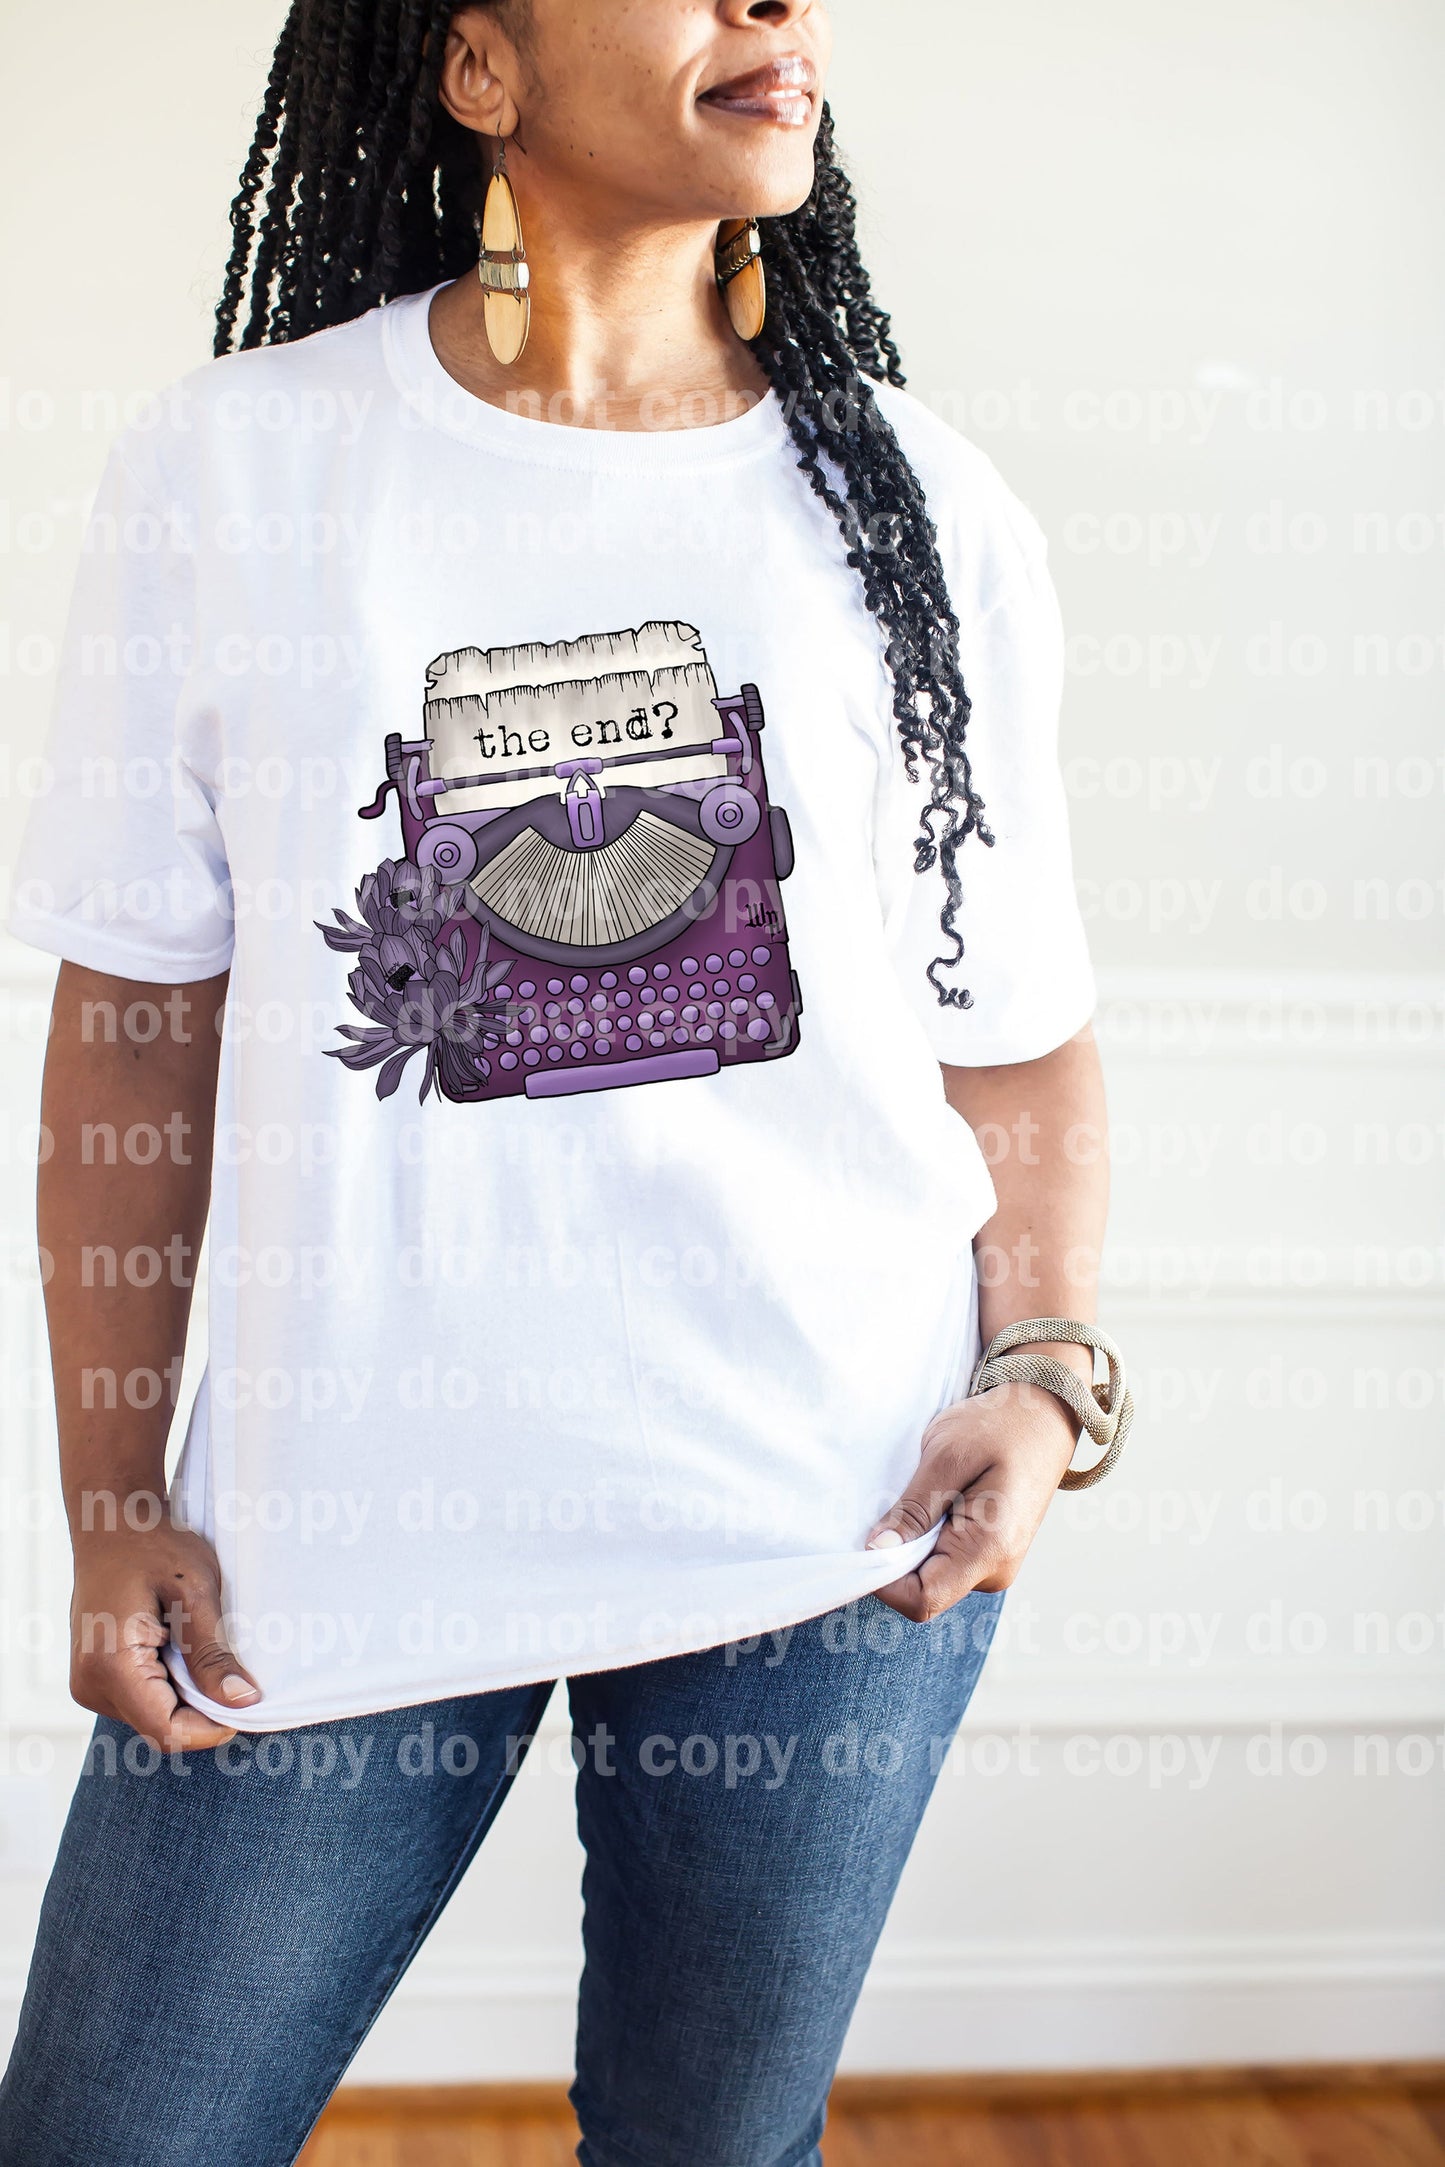 The End Typewriter Dream Print or Sublimation Print